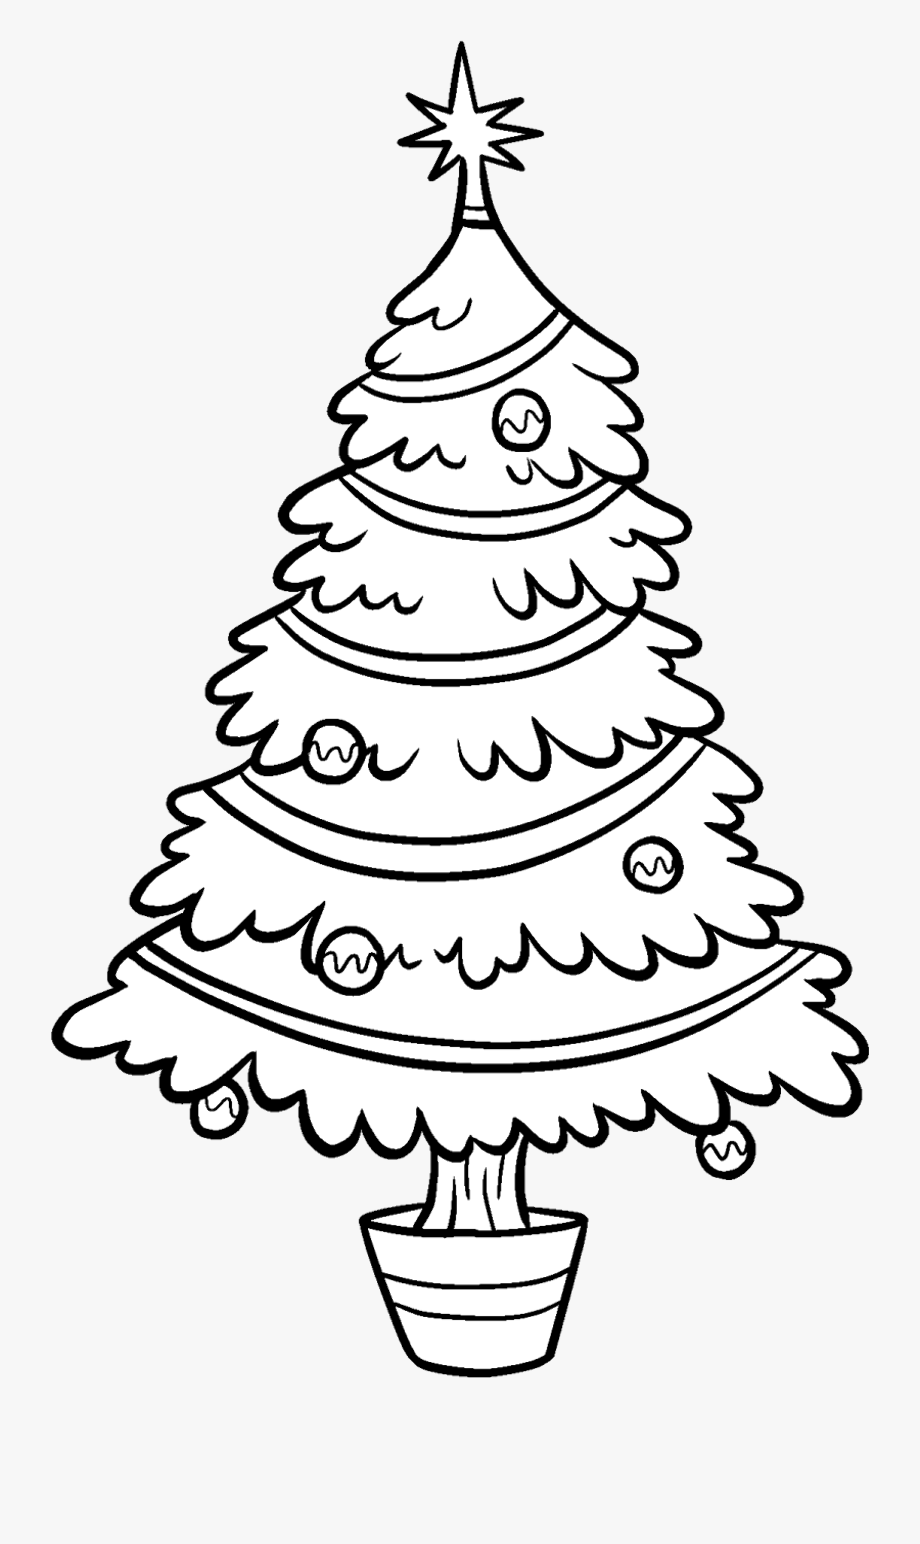 Download High Quality christmas tree clipart black and